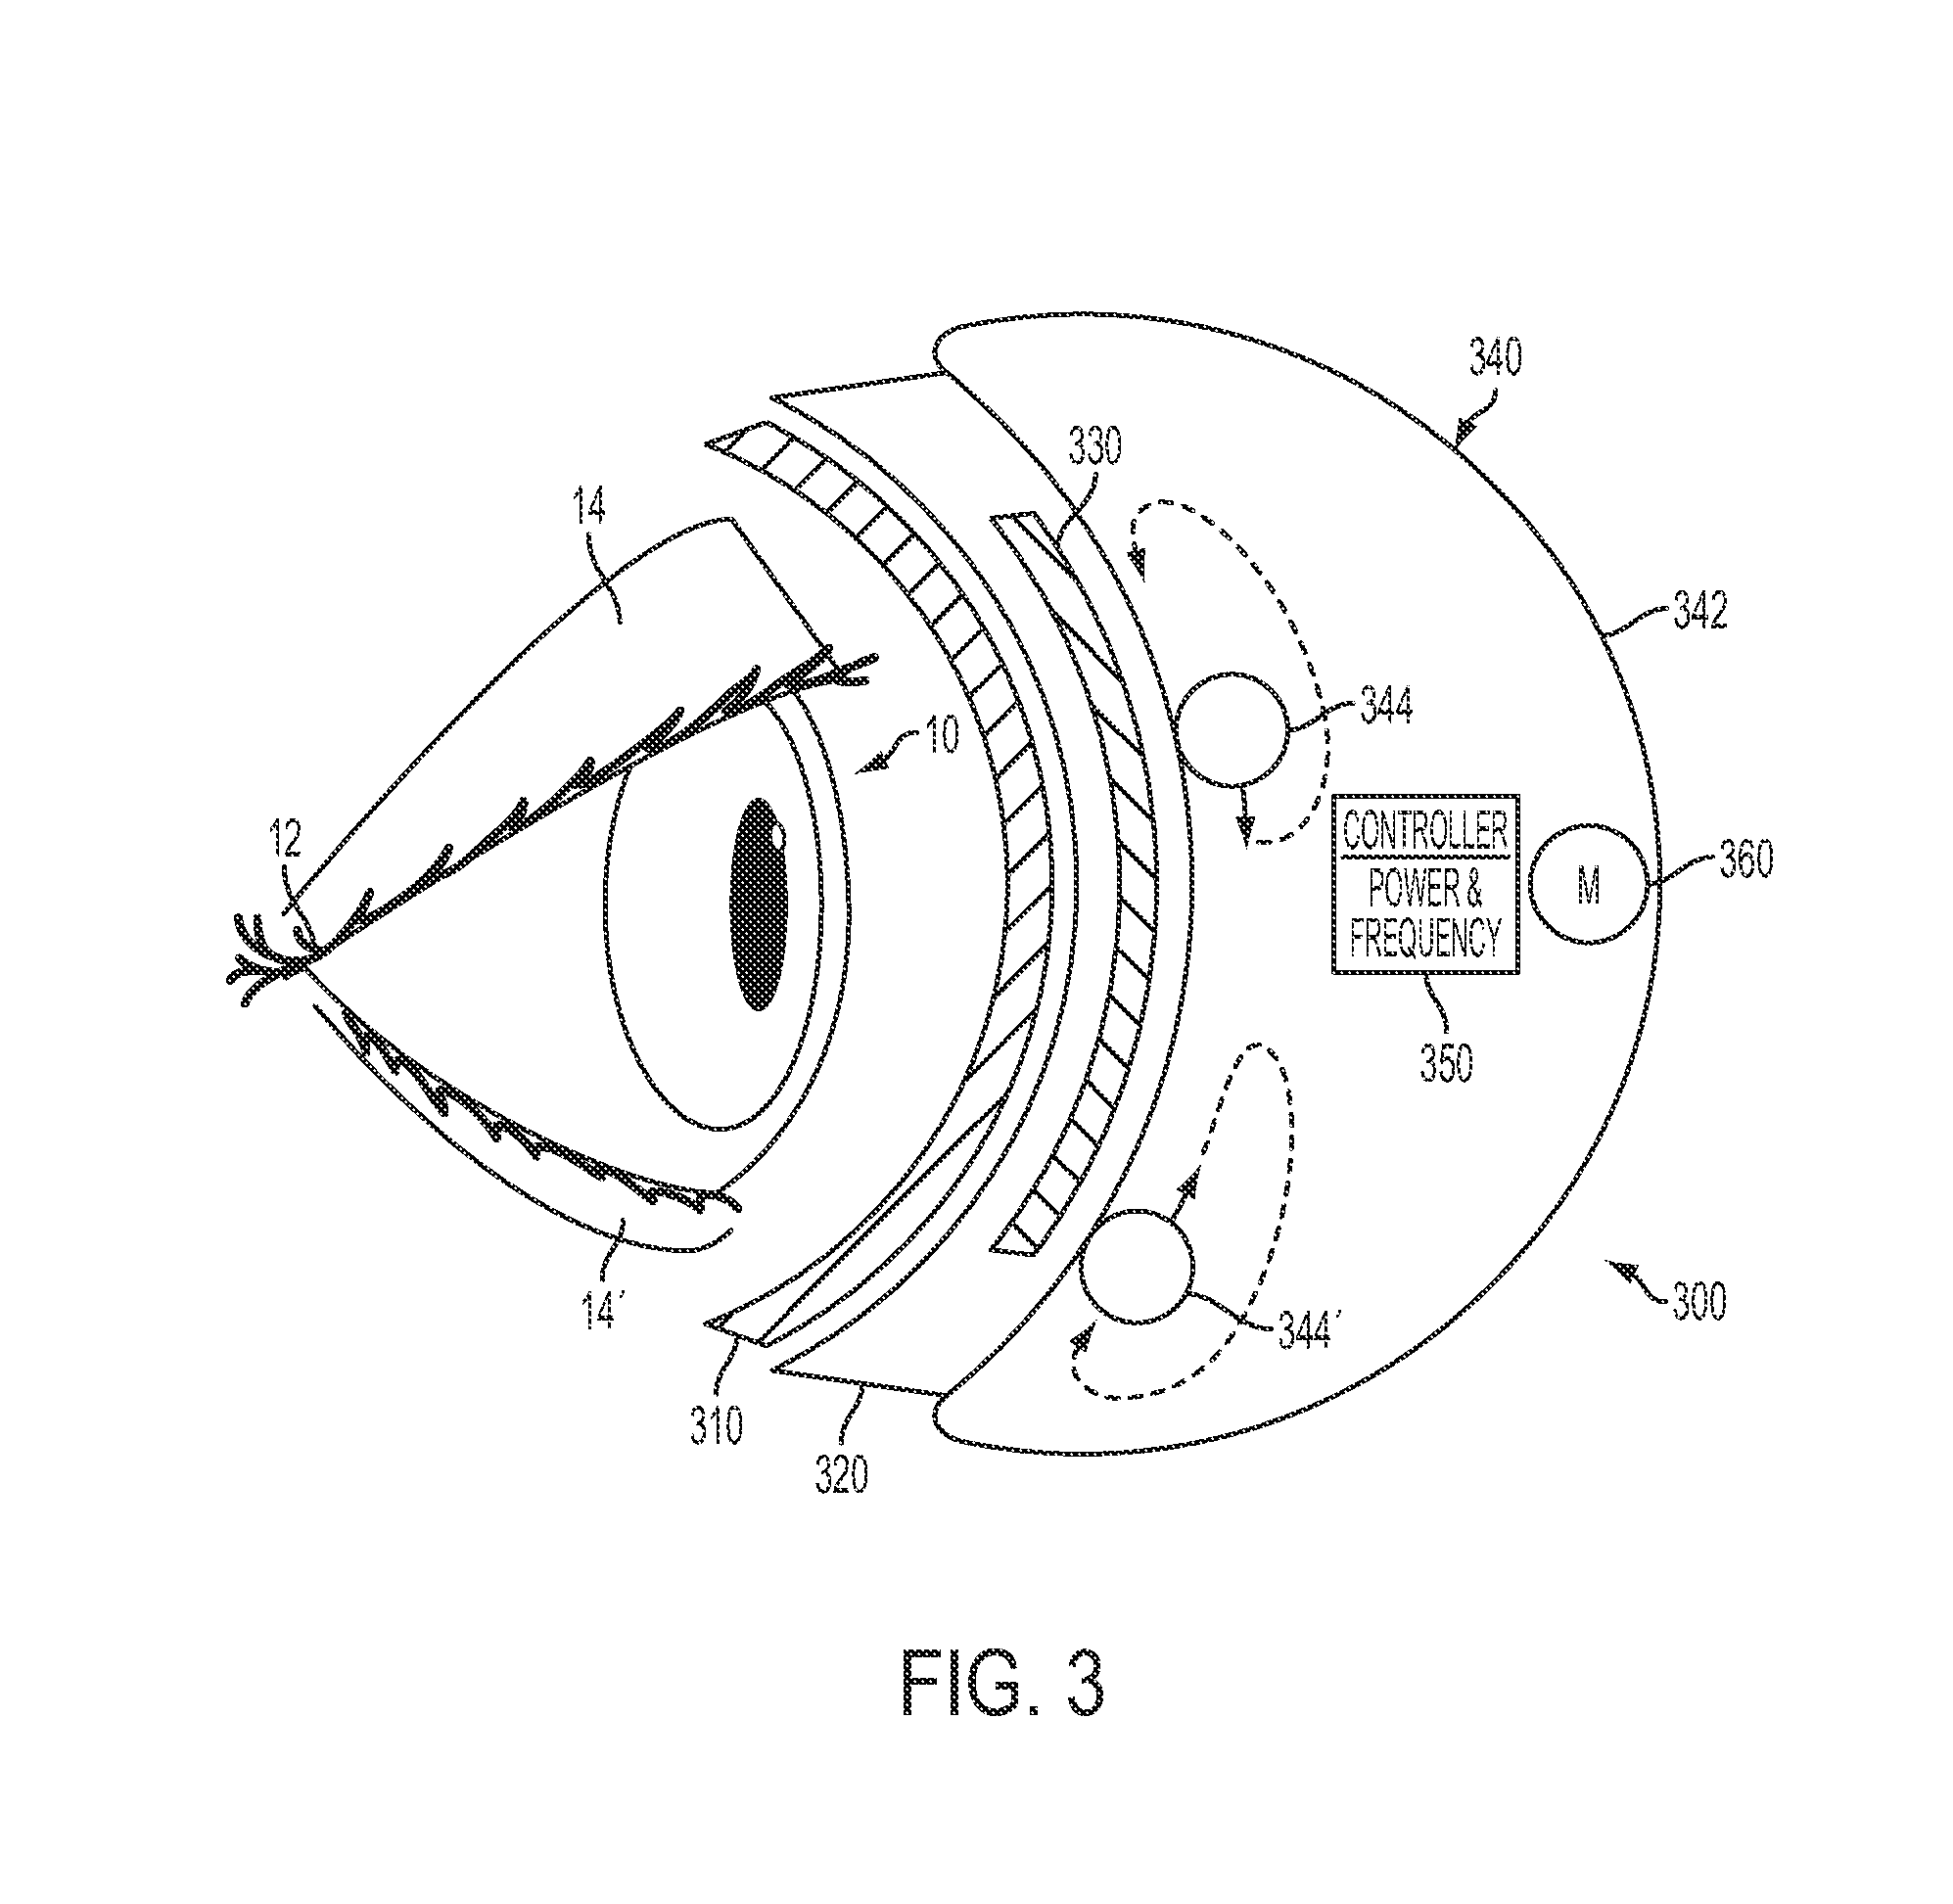 Systems, devices, kits and methods for therapy of the eye